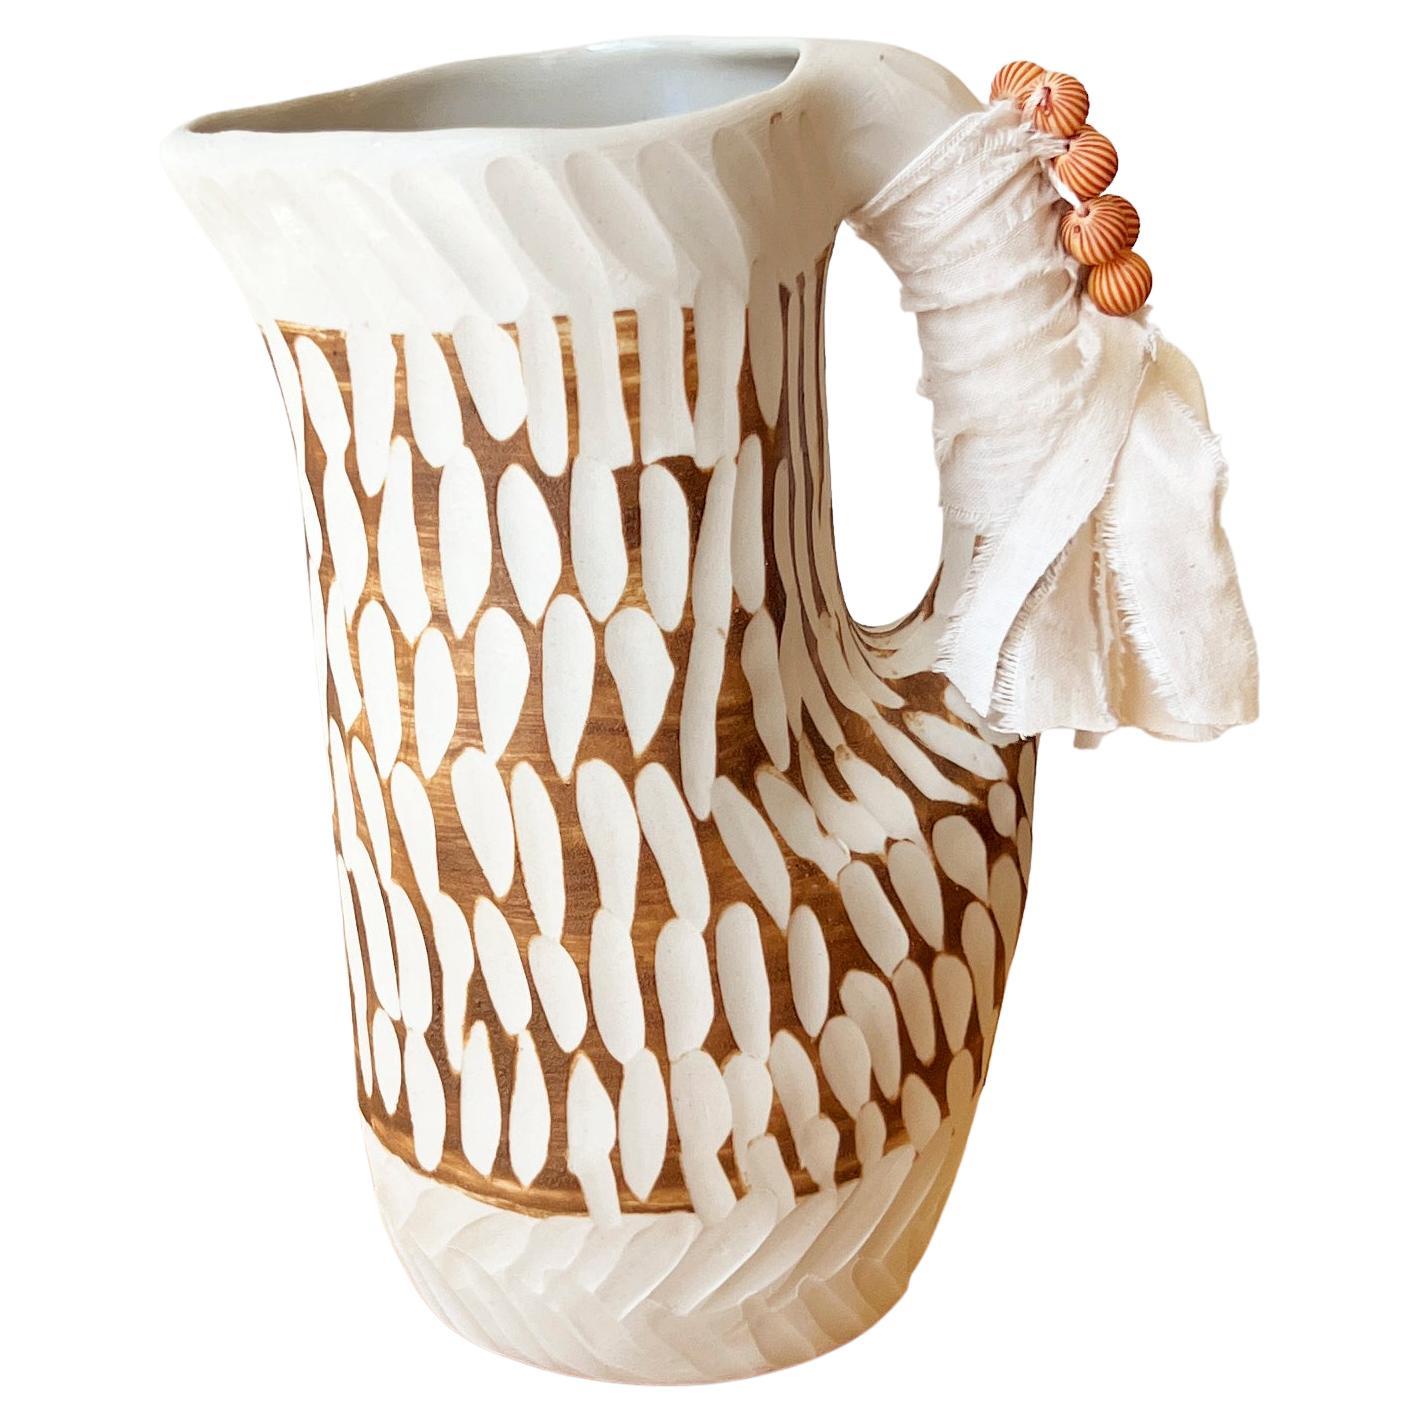 Terra Whimsical Handmade Ceramic Jug in Sienna and White w/ Fabric and Beads For Sale